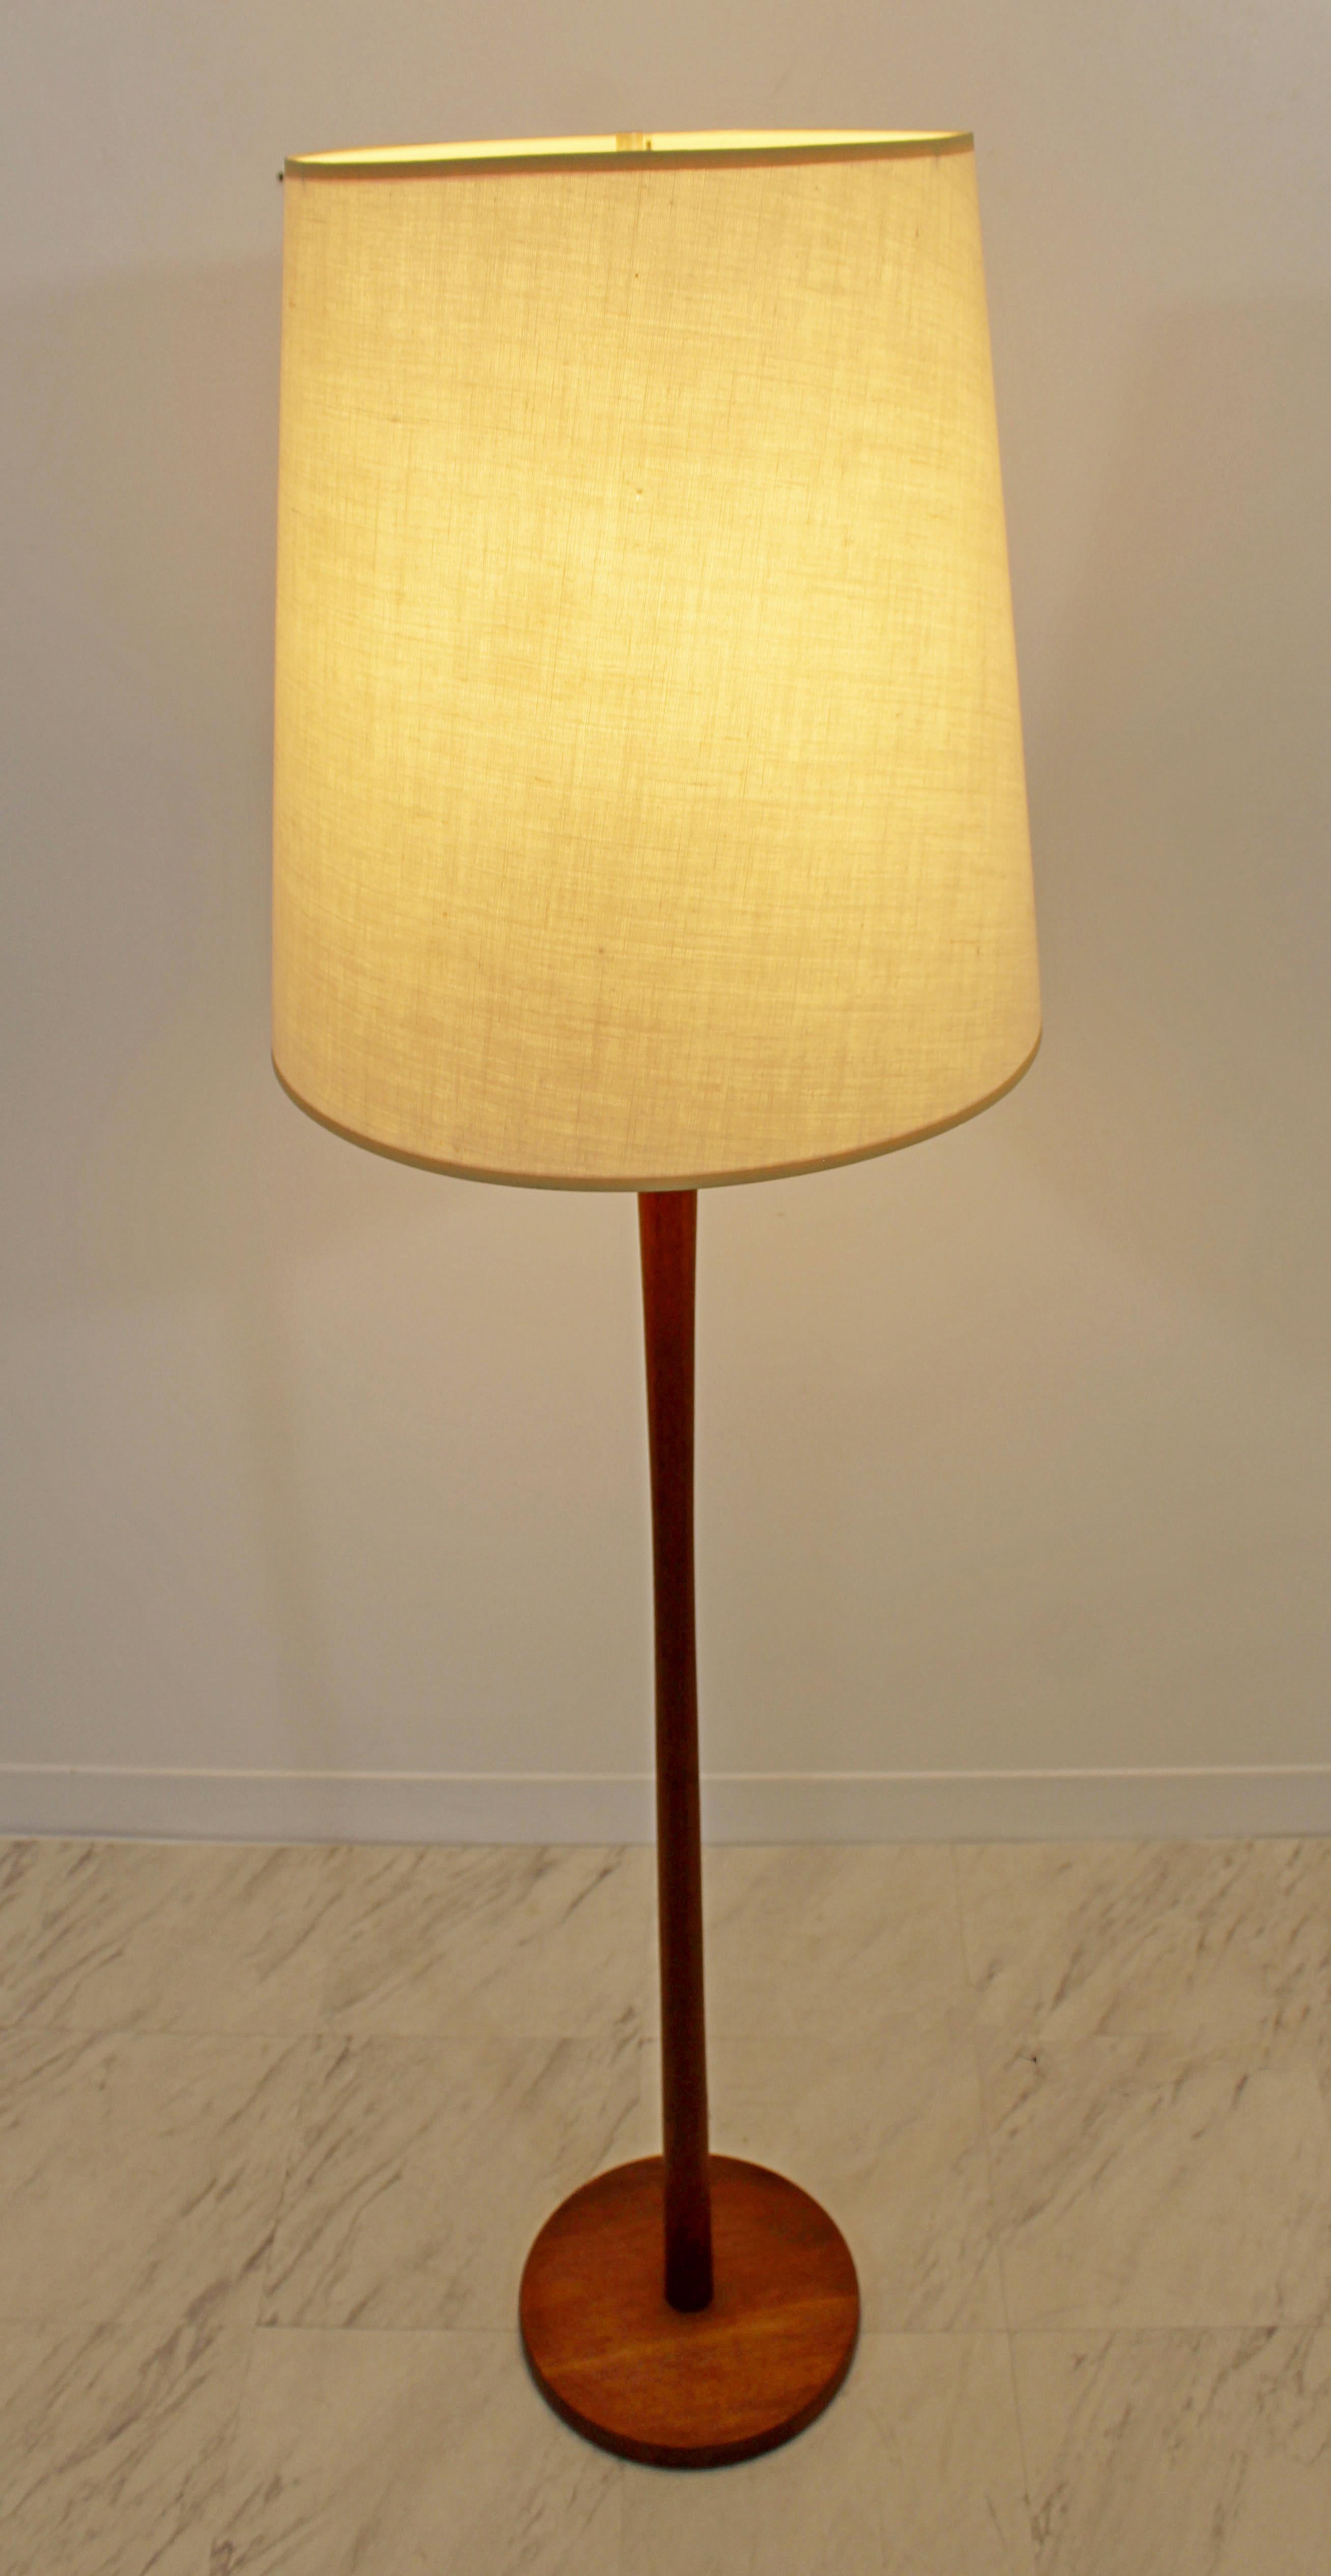 For your consideration is a fantastic, tall, teak floor lamp, with original shade and chrome finial, made in Denmark, circa 1960s. In excellent condition. The dimensions of the lamp are 11